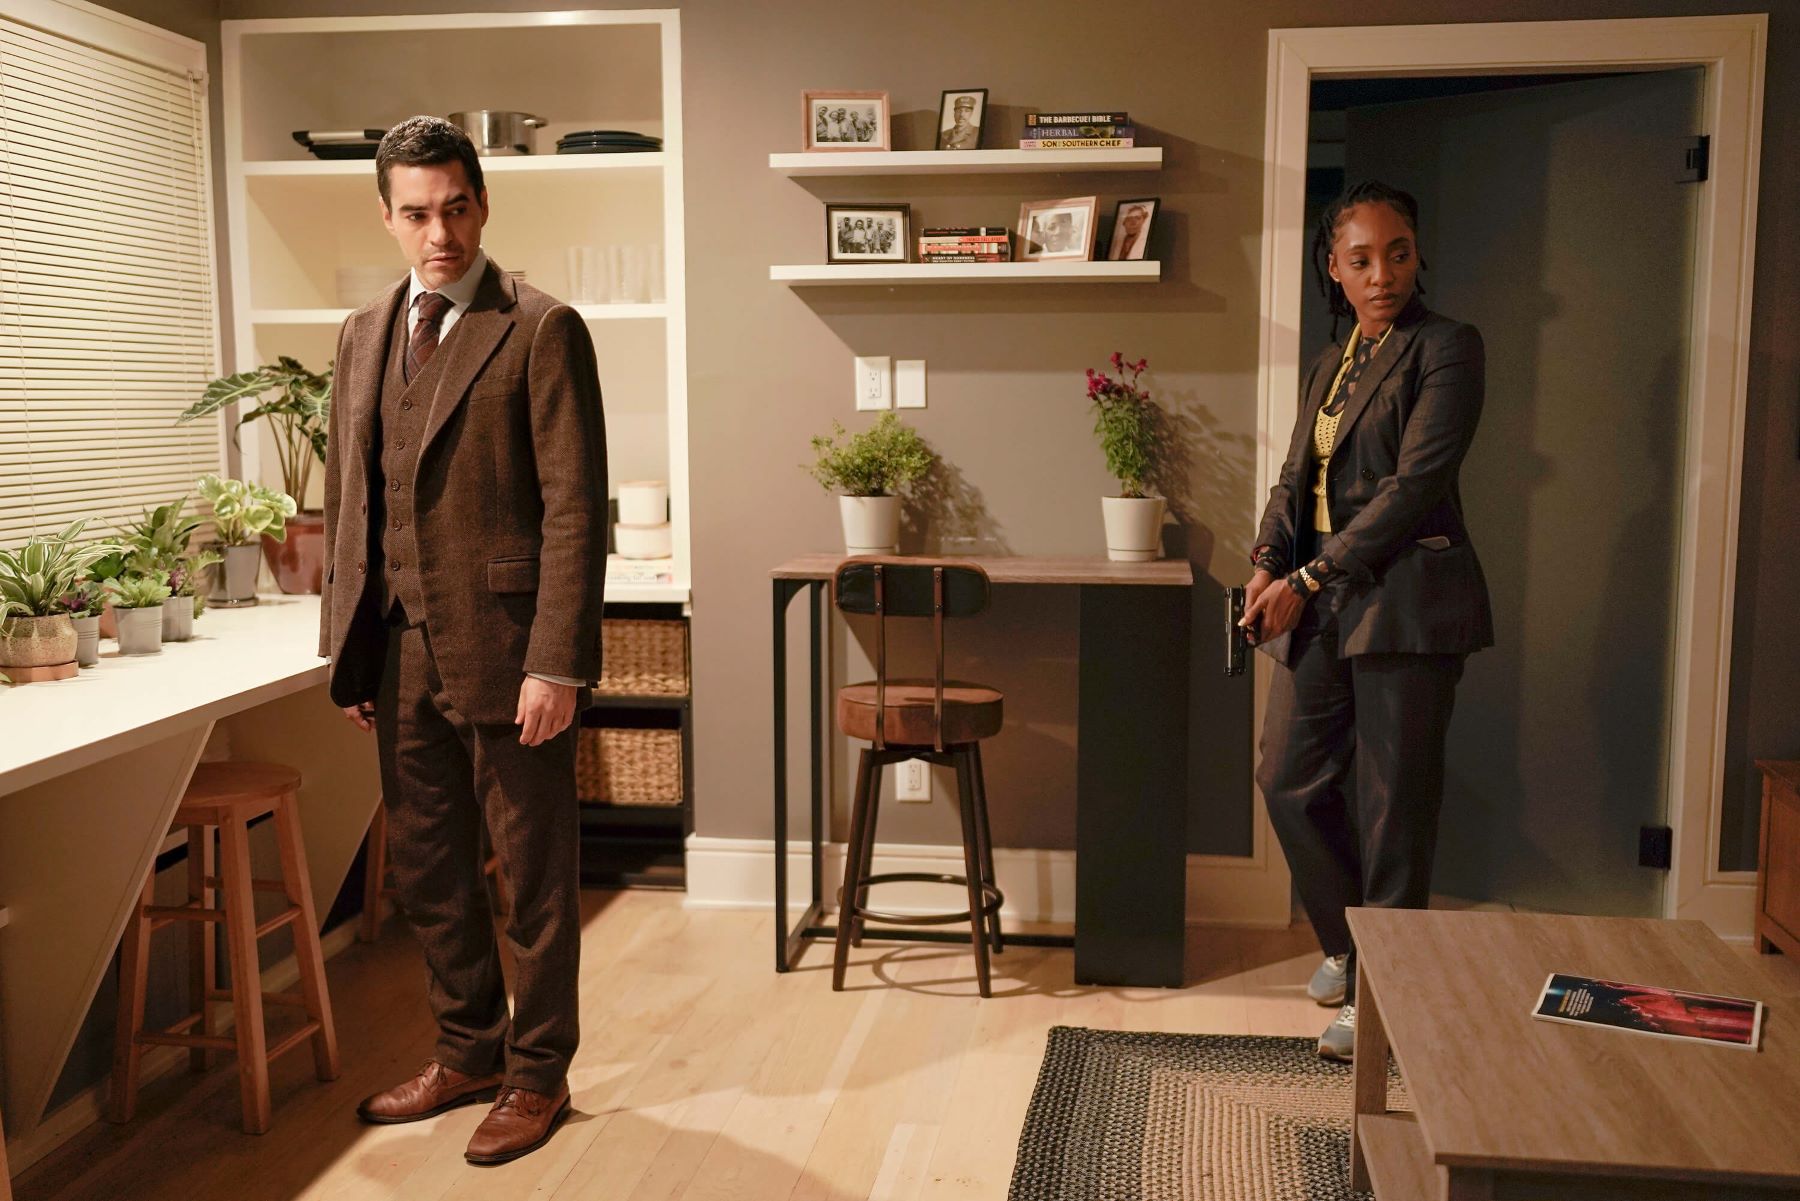 Ramón Rodríguez as Will Trent and Iantha Richardson as Faith Mitchell in 'Will Trent' Season 1 Episode 6 on ABC. Will wears a dark brown three-piece suit. Faith wears a dark gray suit over a light yellow sweater.